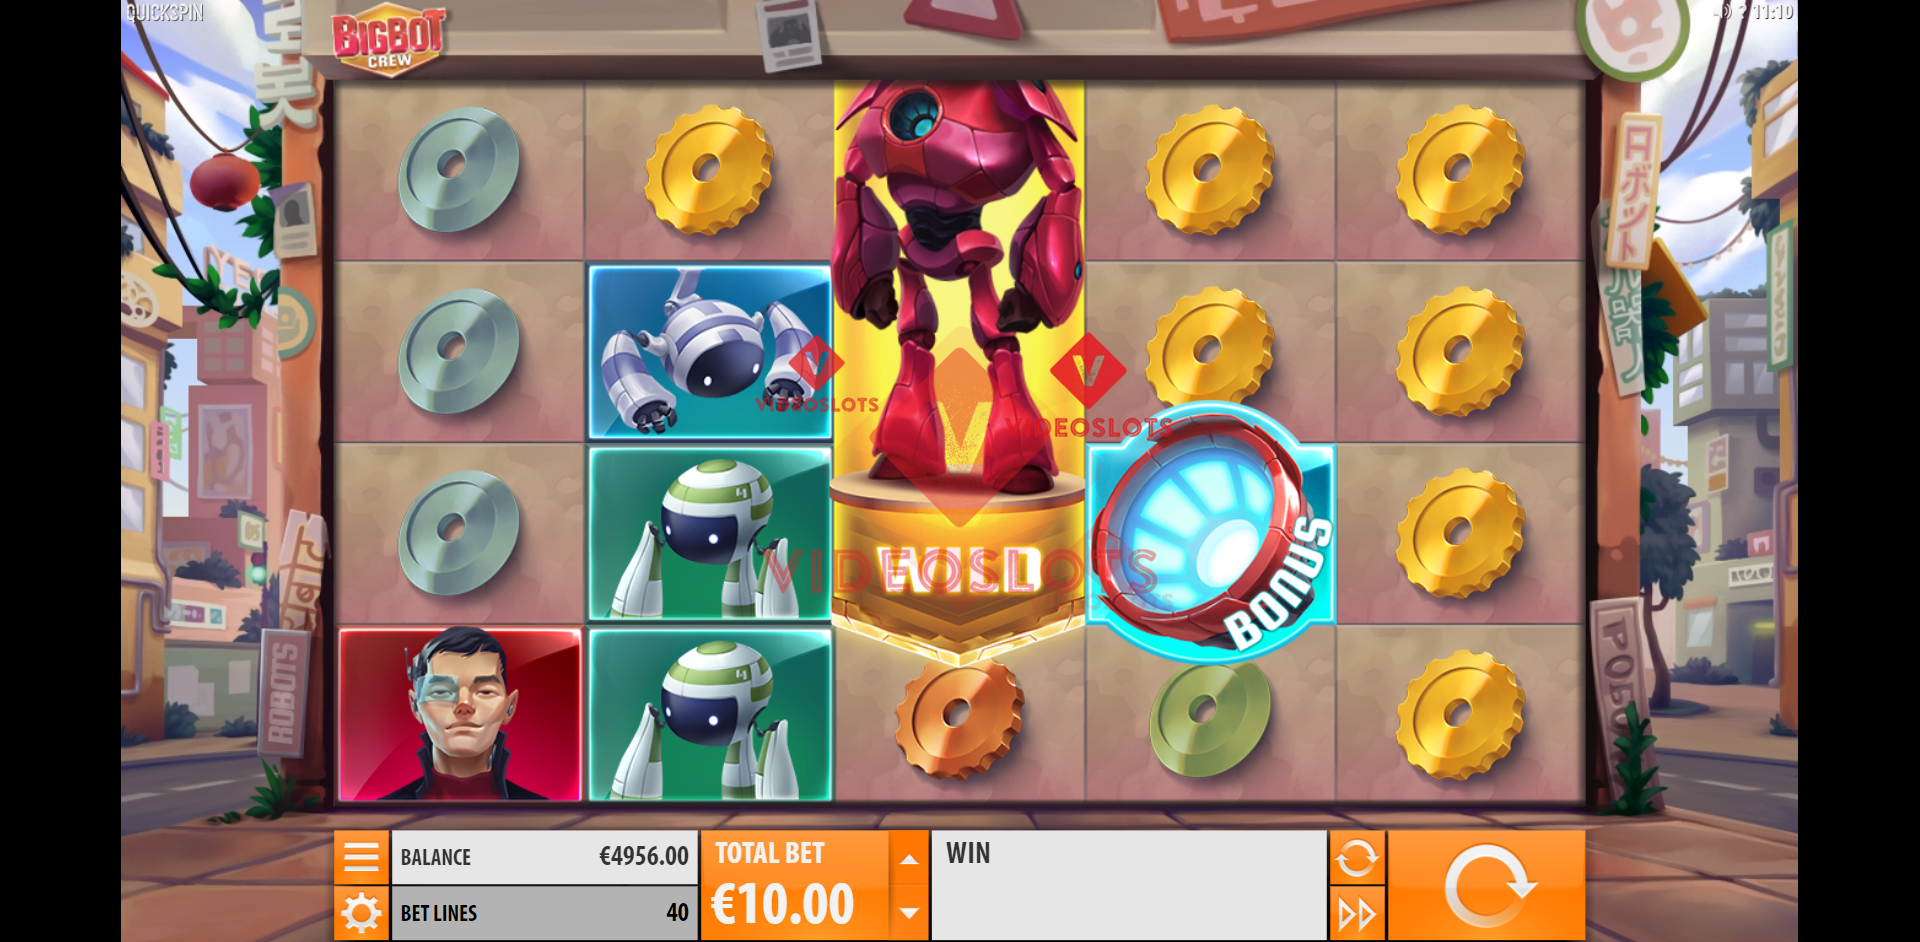 Base Game for Big Bot Crew slot from Quickspin